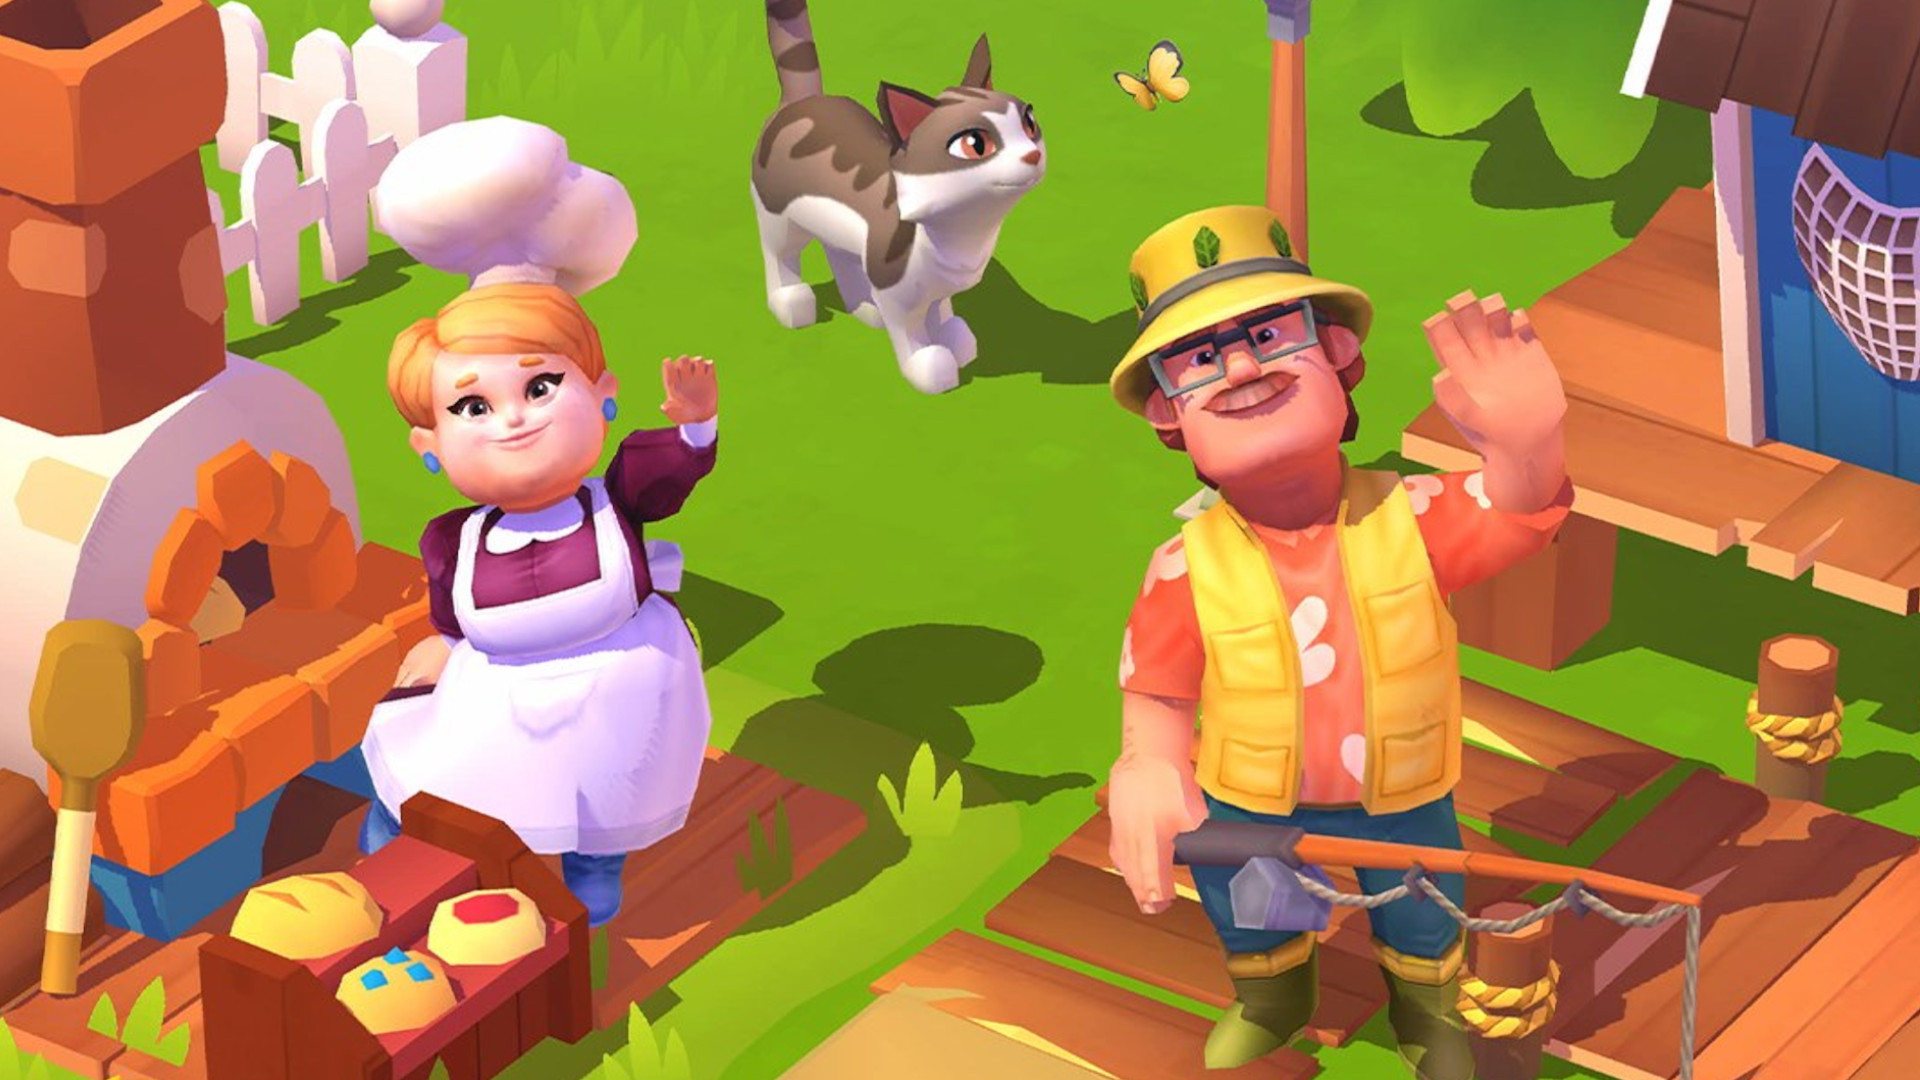 Zynga woos back lapsed Facebook farmers with 'FarmVille 2